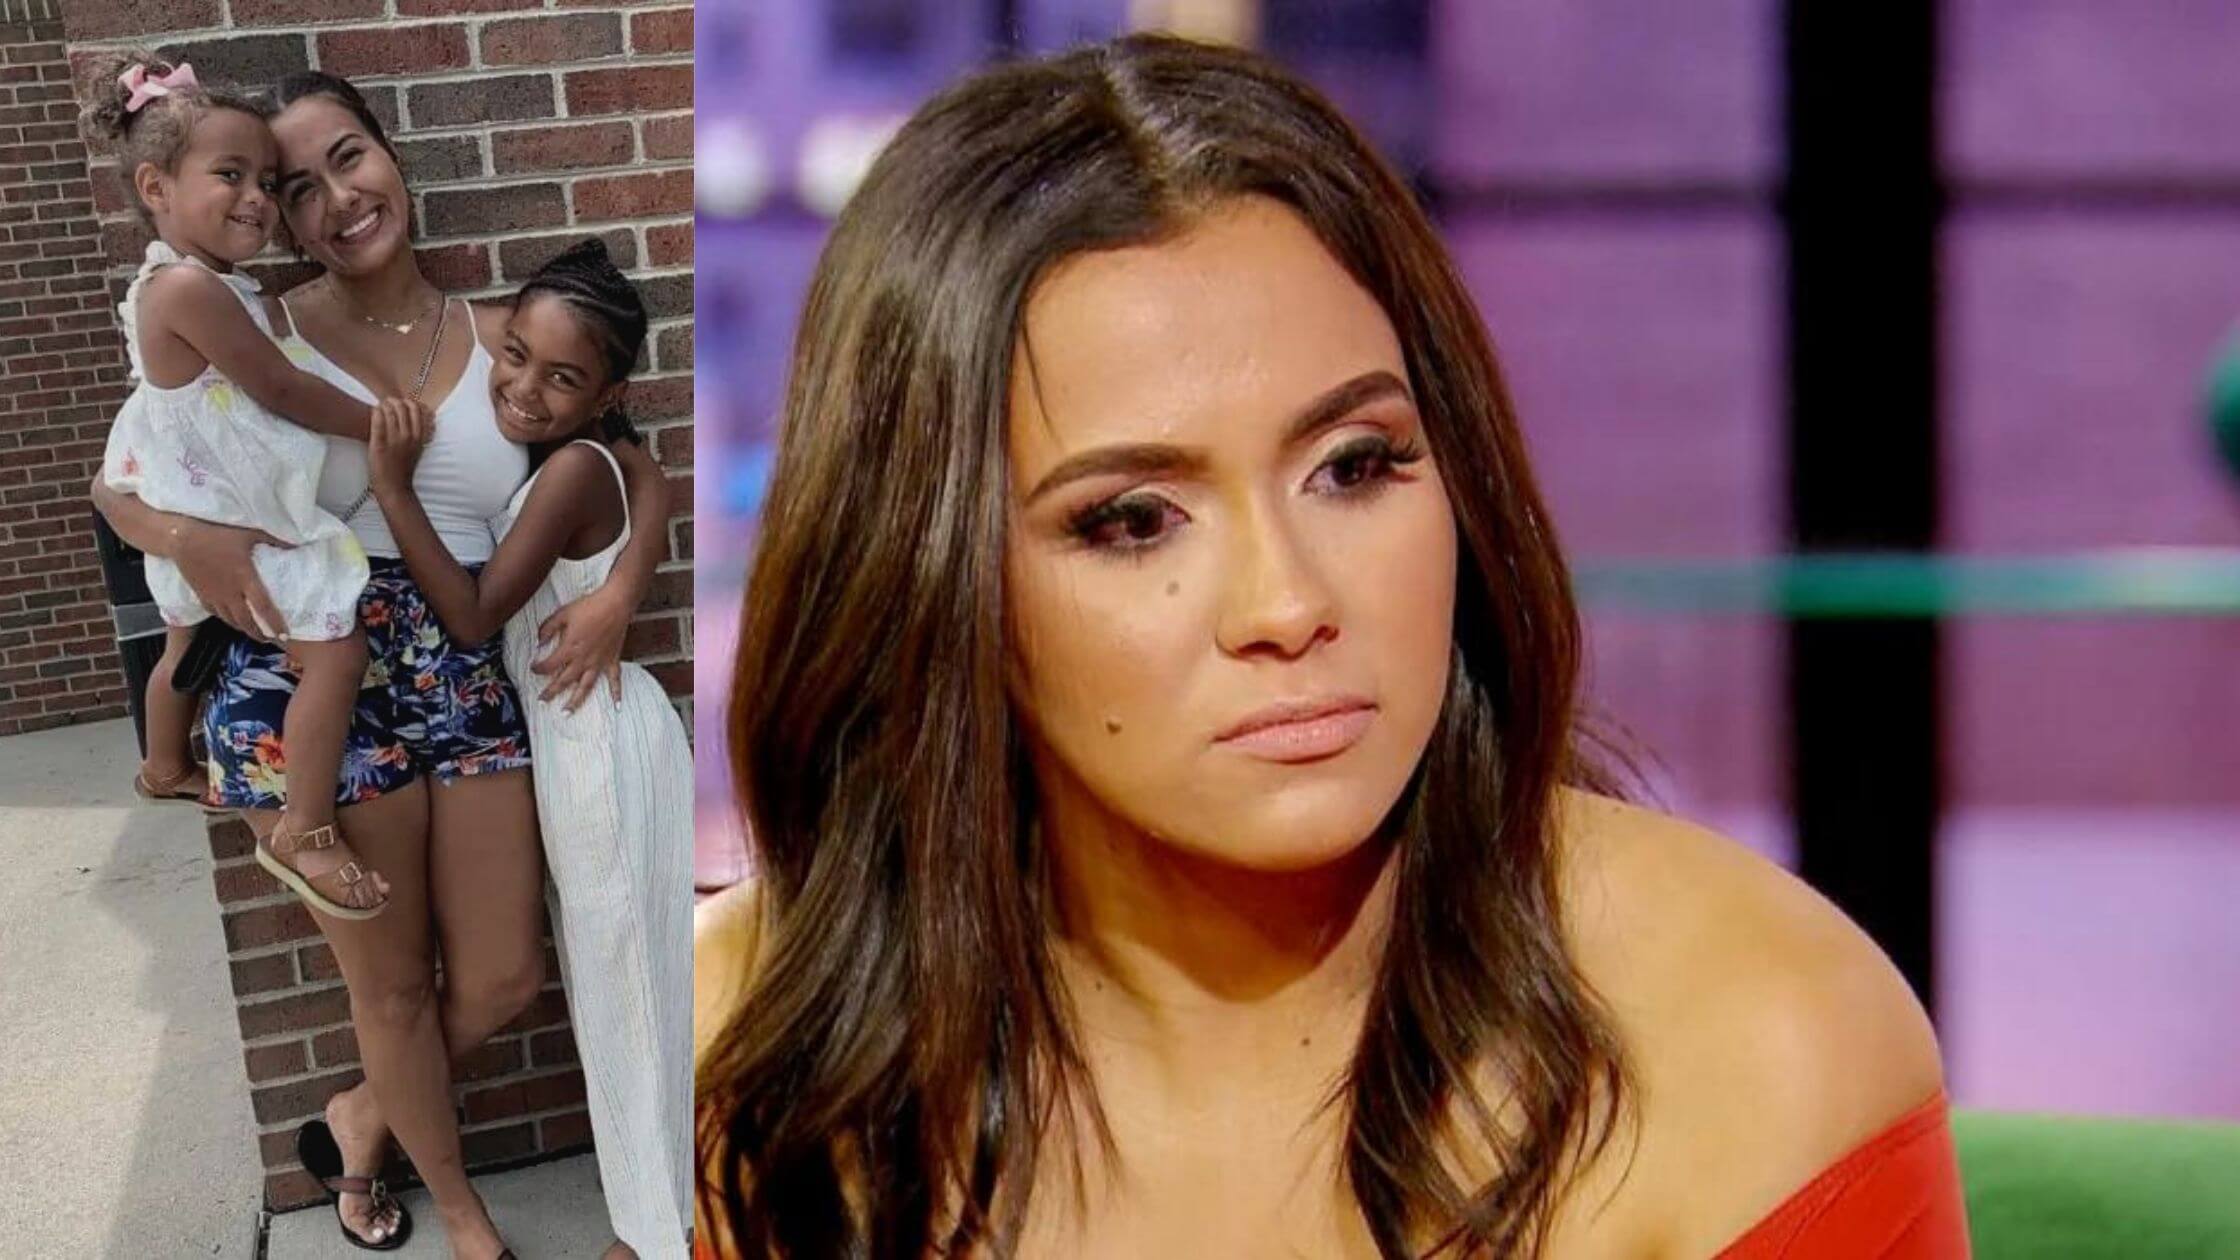 Shocking News For Fans!! Teen Mom Co-Star Briana Appears To Be Happy About Her New Kid